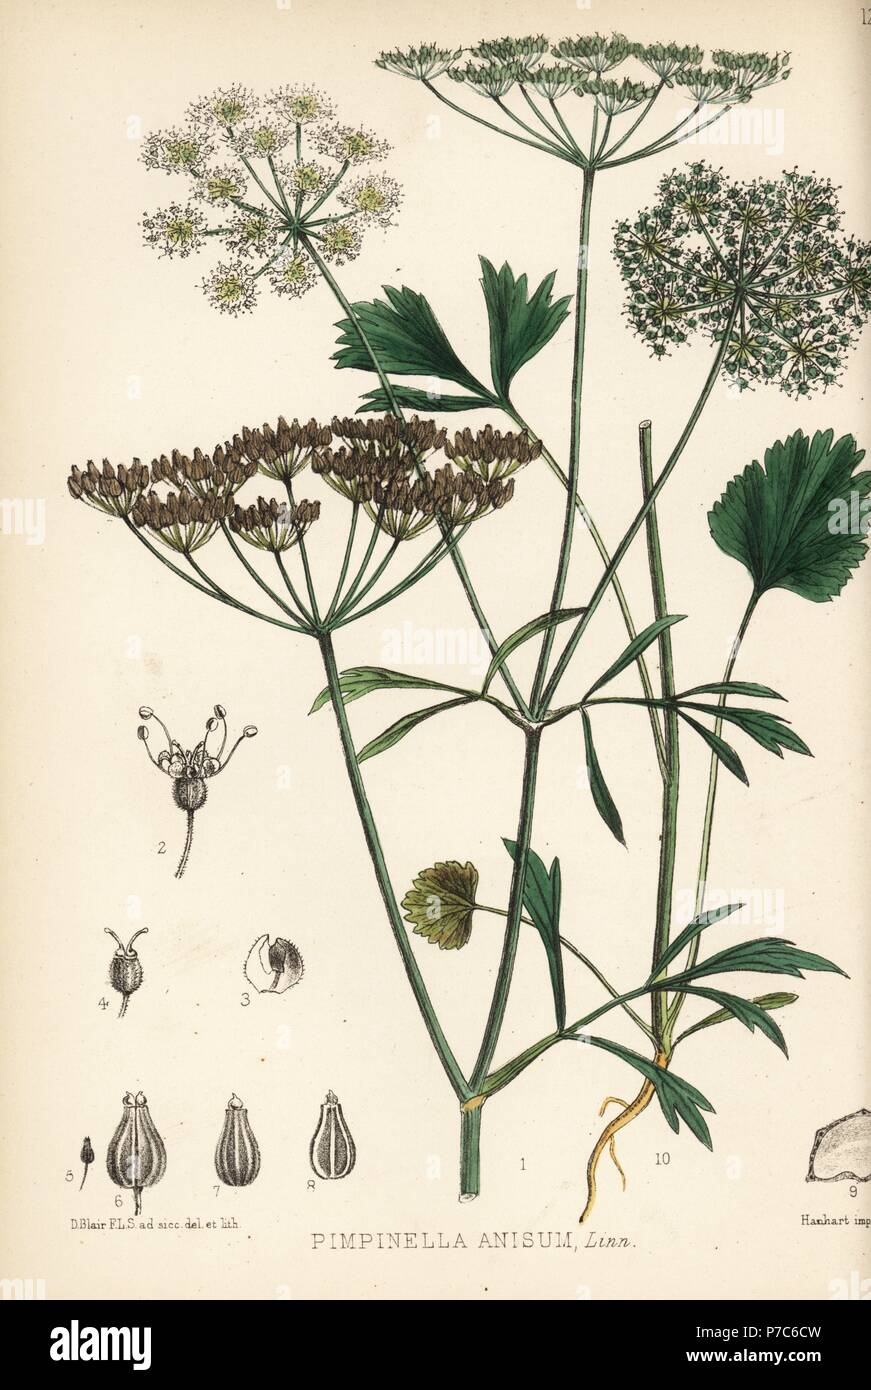 Anise or aniseed, Pimpinella anisum. Handcoloured lithograph by Hanhart after a botanical illustration by David Blair from Robert Bentley and Henry Trimen's Medicinal Plants, London, 1880. Stock Photo